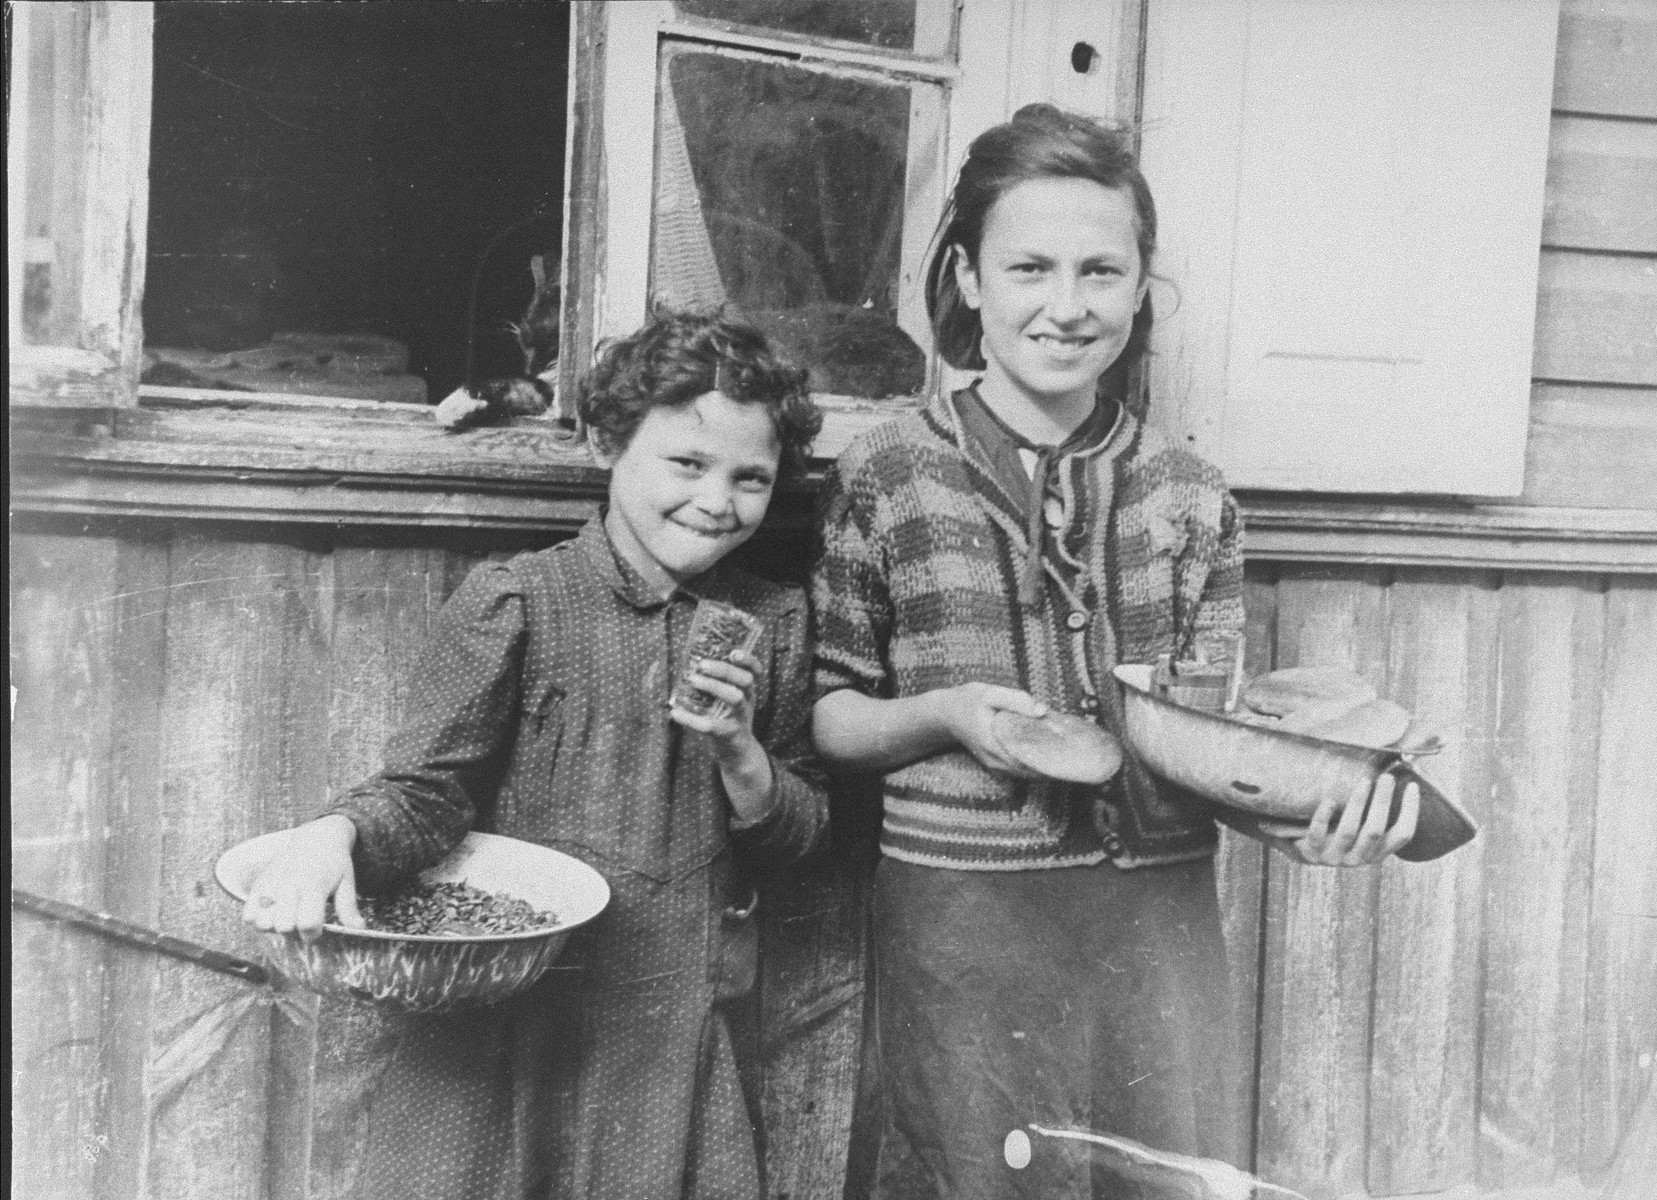 Two young girls stand outside a house in the Kovno ghetto holding bread and bowls of food.

The inscription written on the back of the photograph by George Kadish (translated from Yiddish), reads, "Children in the Ghetto."